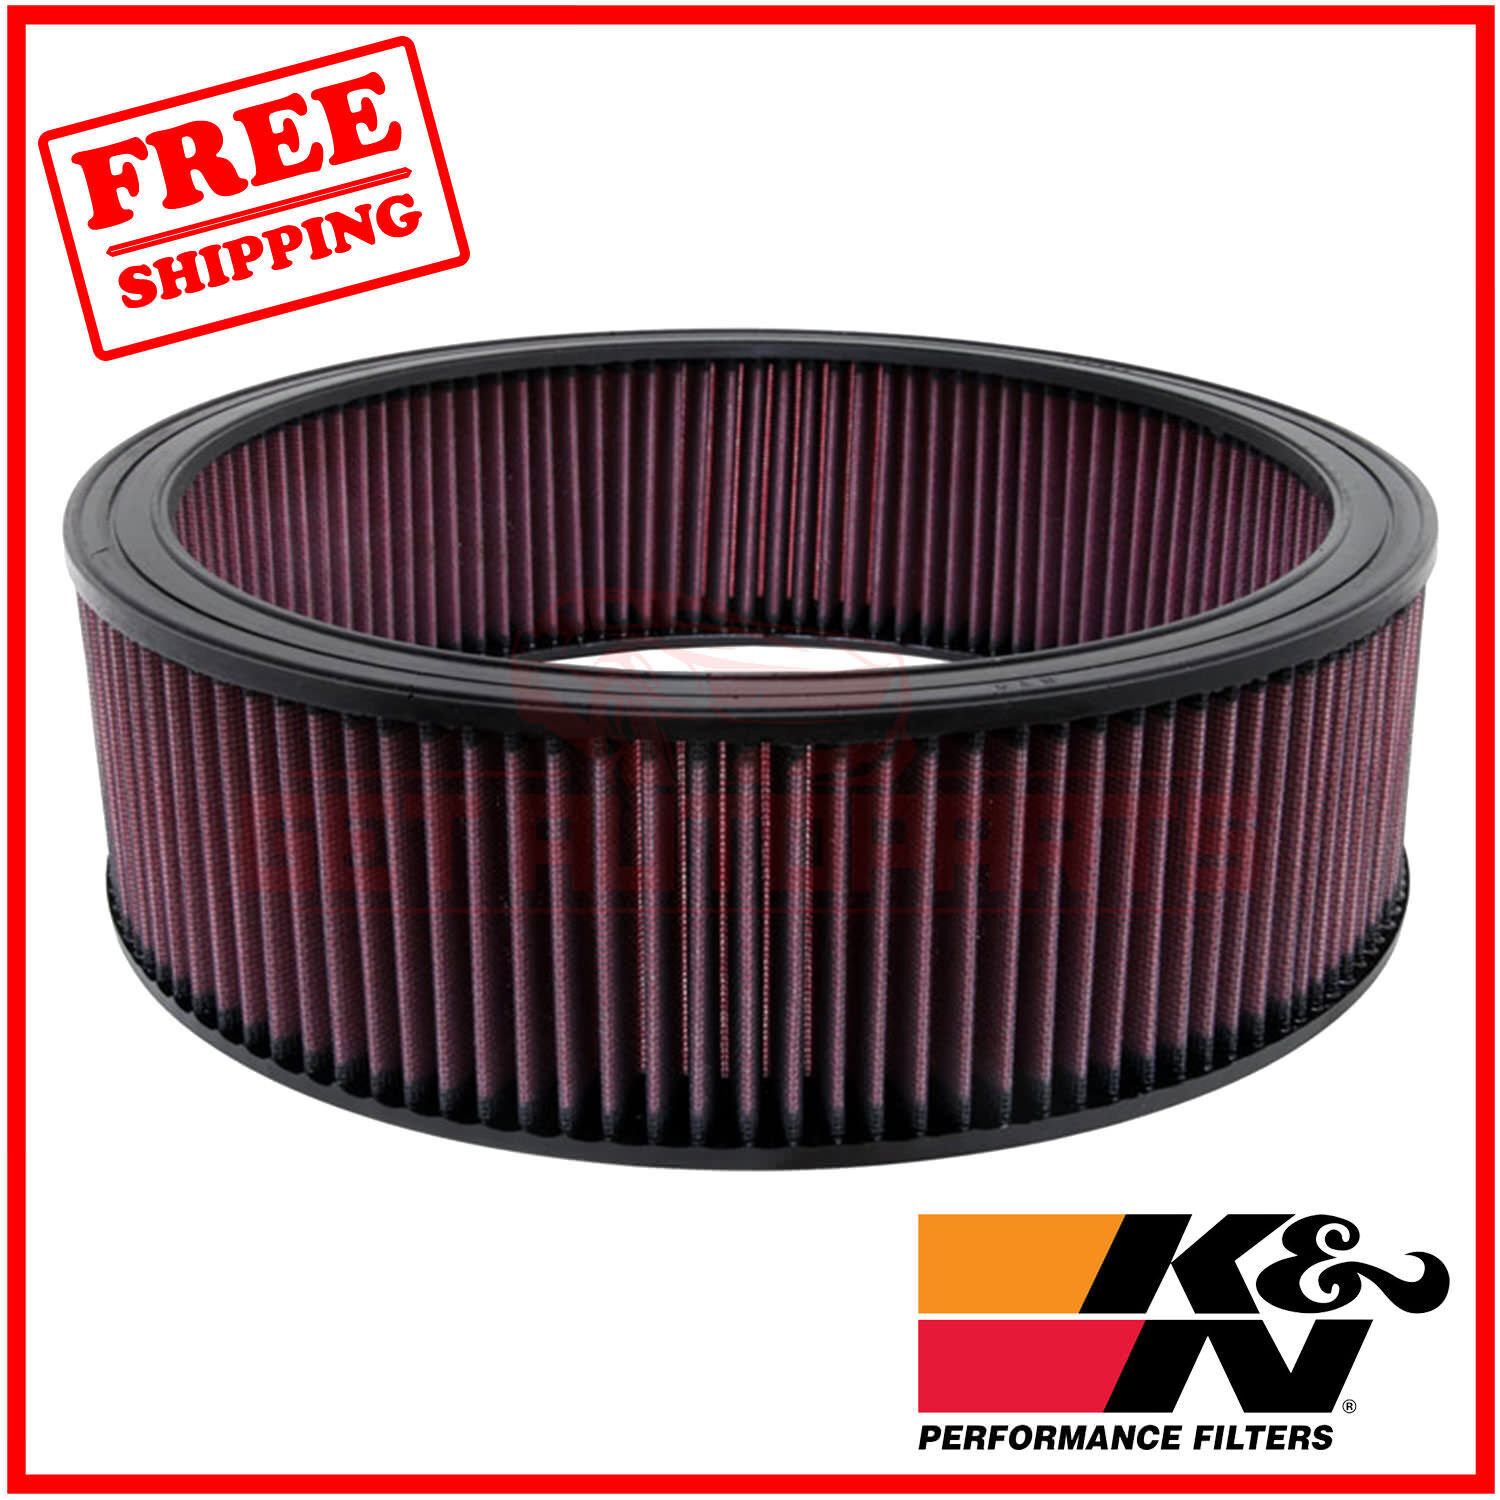 K&N Replacement Air Filter for GMC Caballero 1983-1984